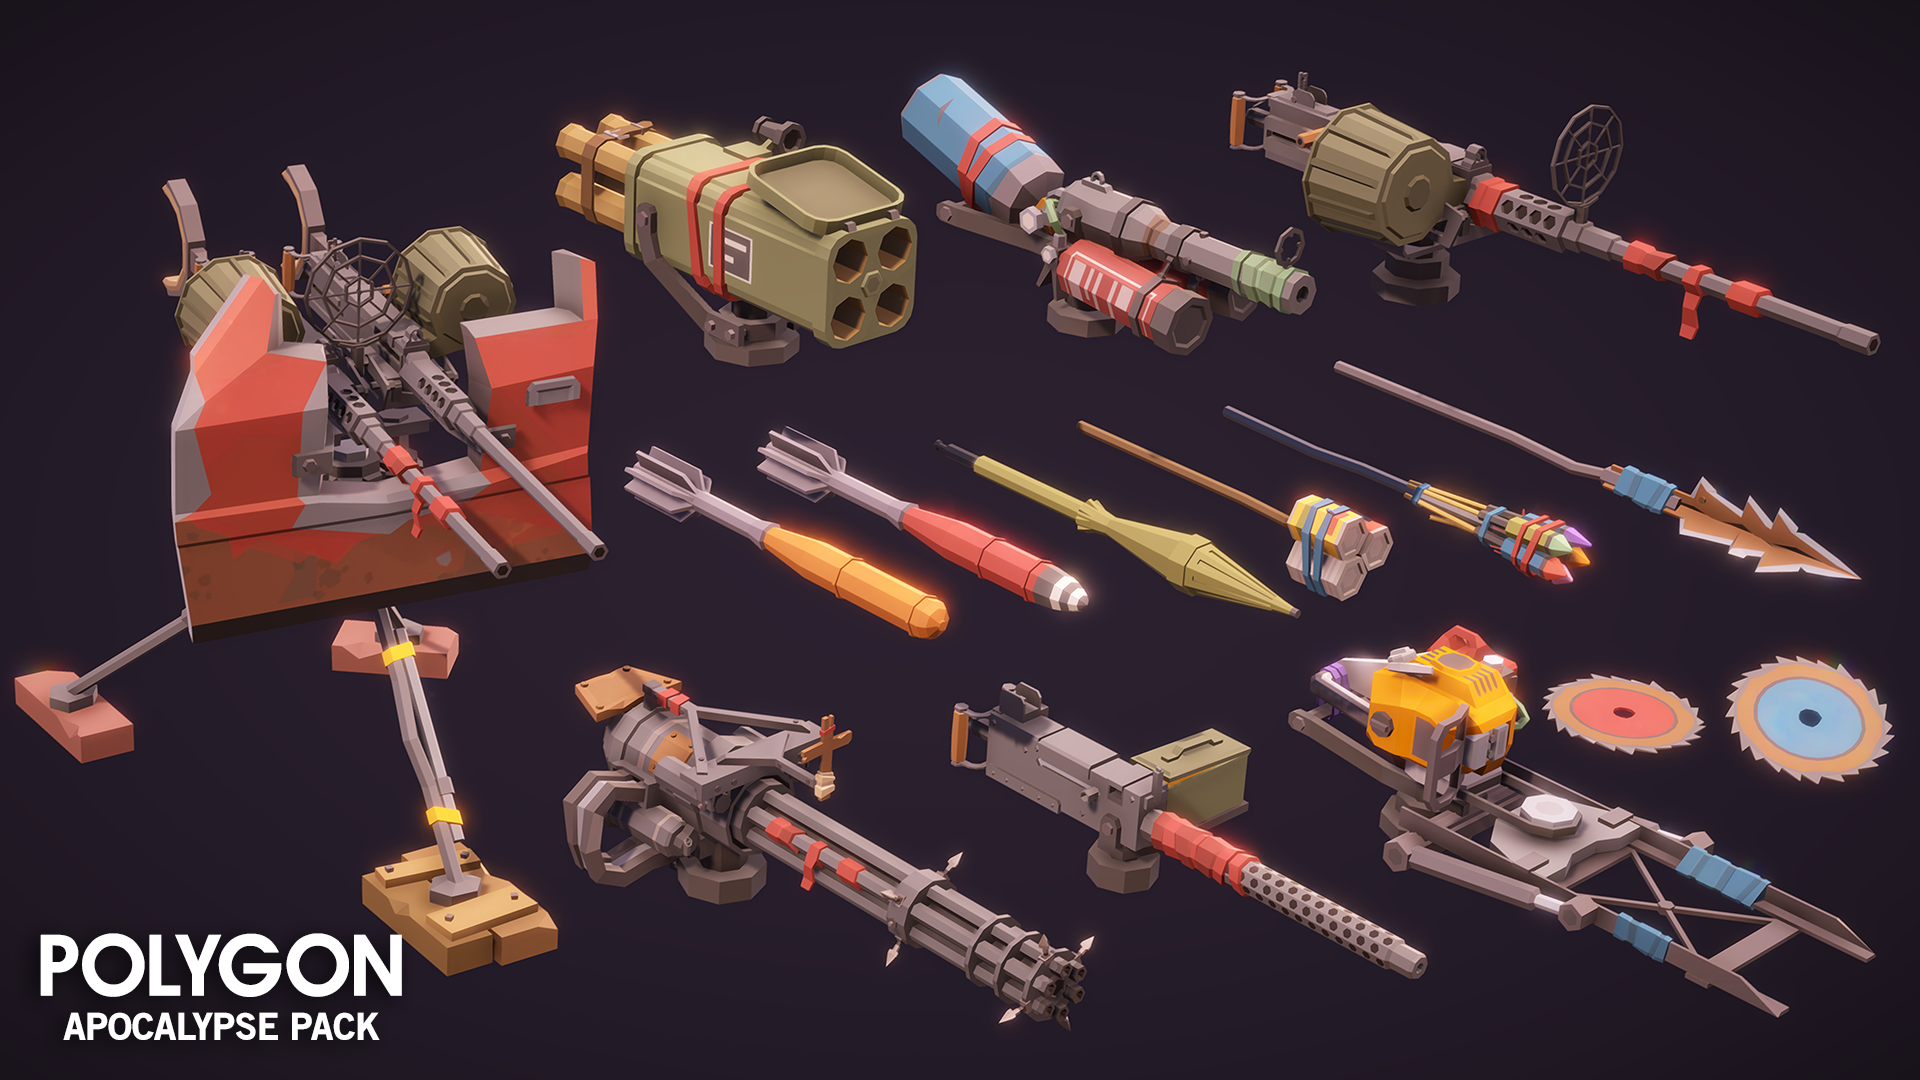 Apocalypse Pack 3D low poly wasteland weapon assets for game development